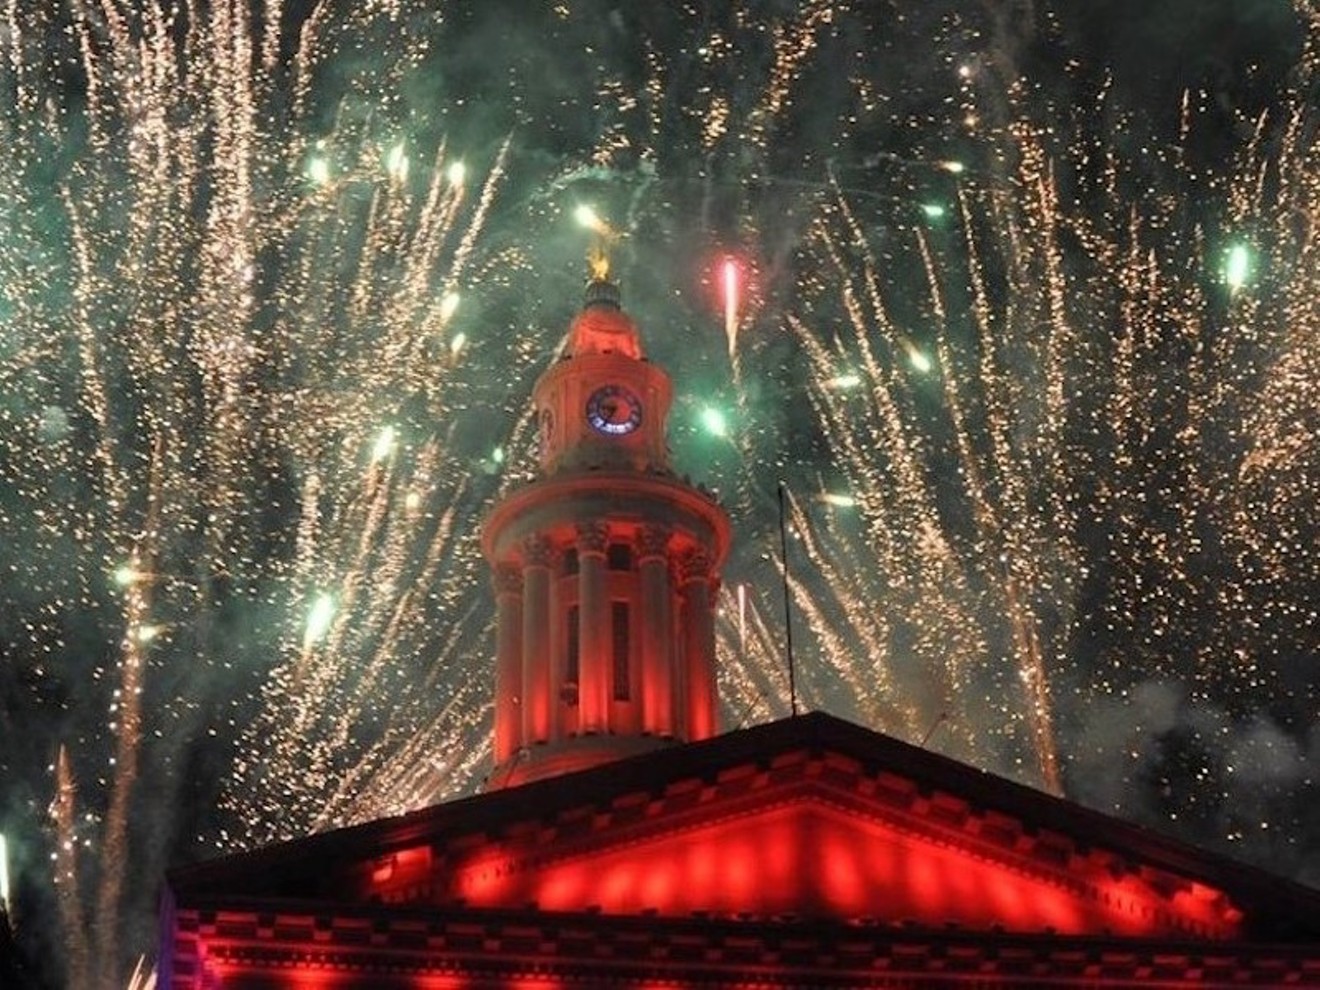 Kick off your Fourth of July festivities at Independence Eve in Civic Center Park on July 3.